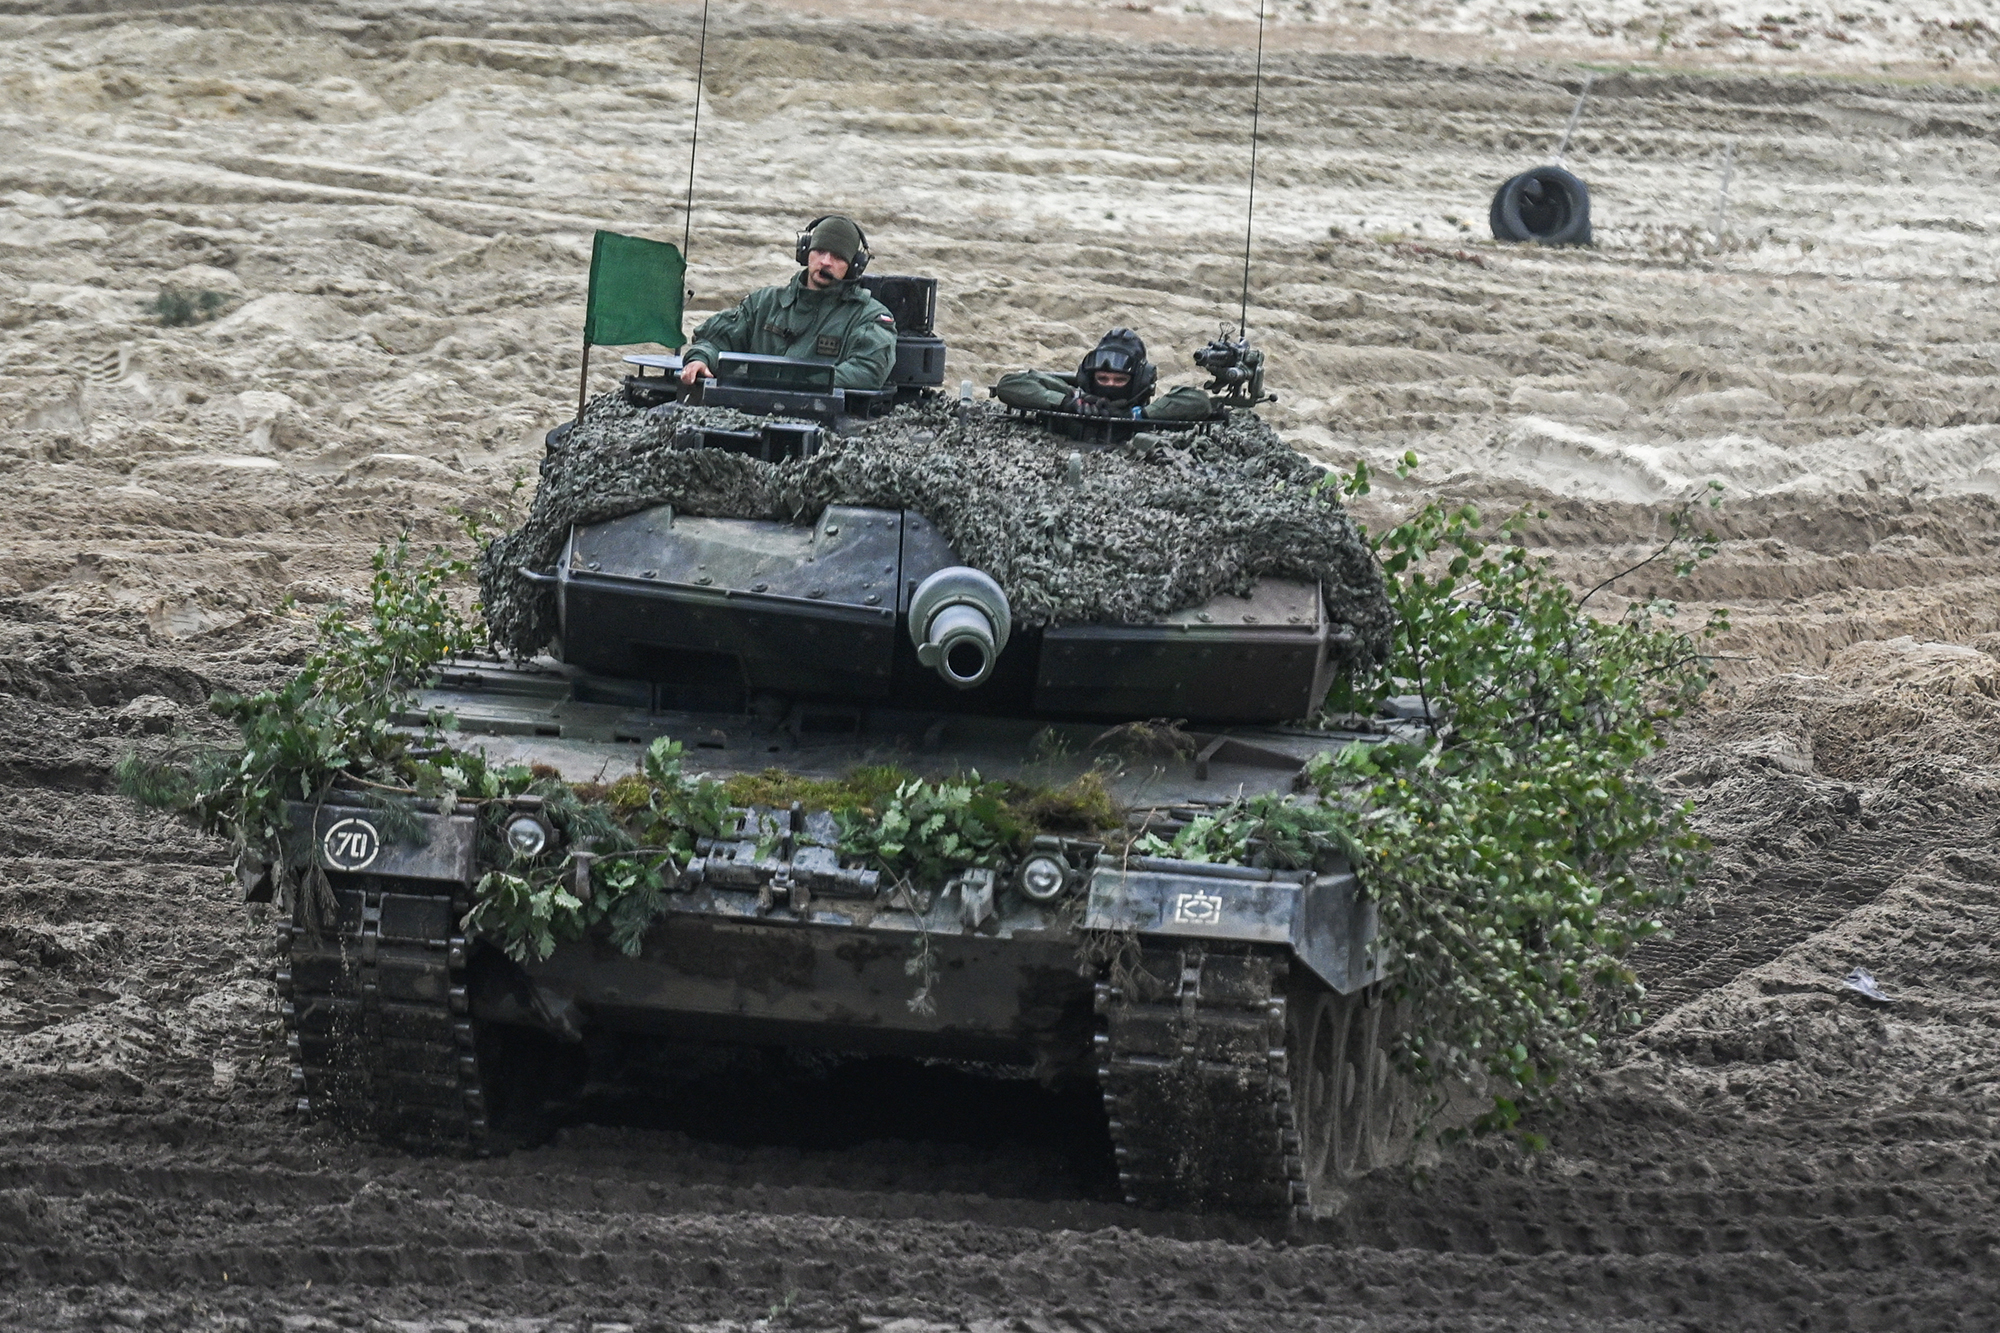 Polish military drive a Leopard tank during a live fire demonstration part of the Bear 22 military exercises at the Nowa Deba training ground on September 21, in Nowa Deba, Poland. 